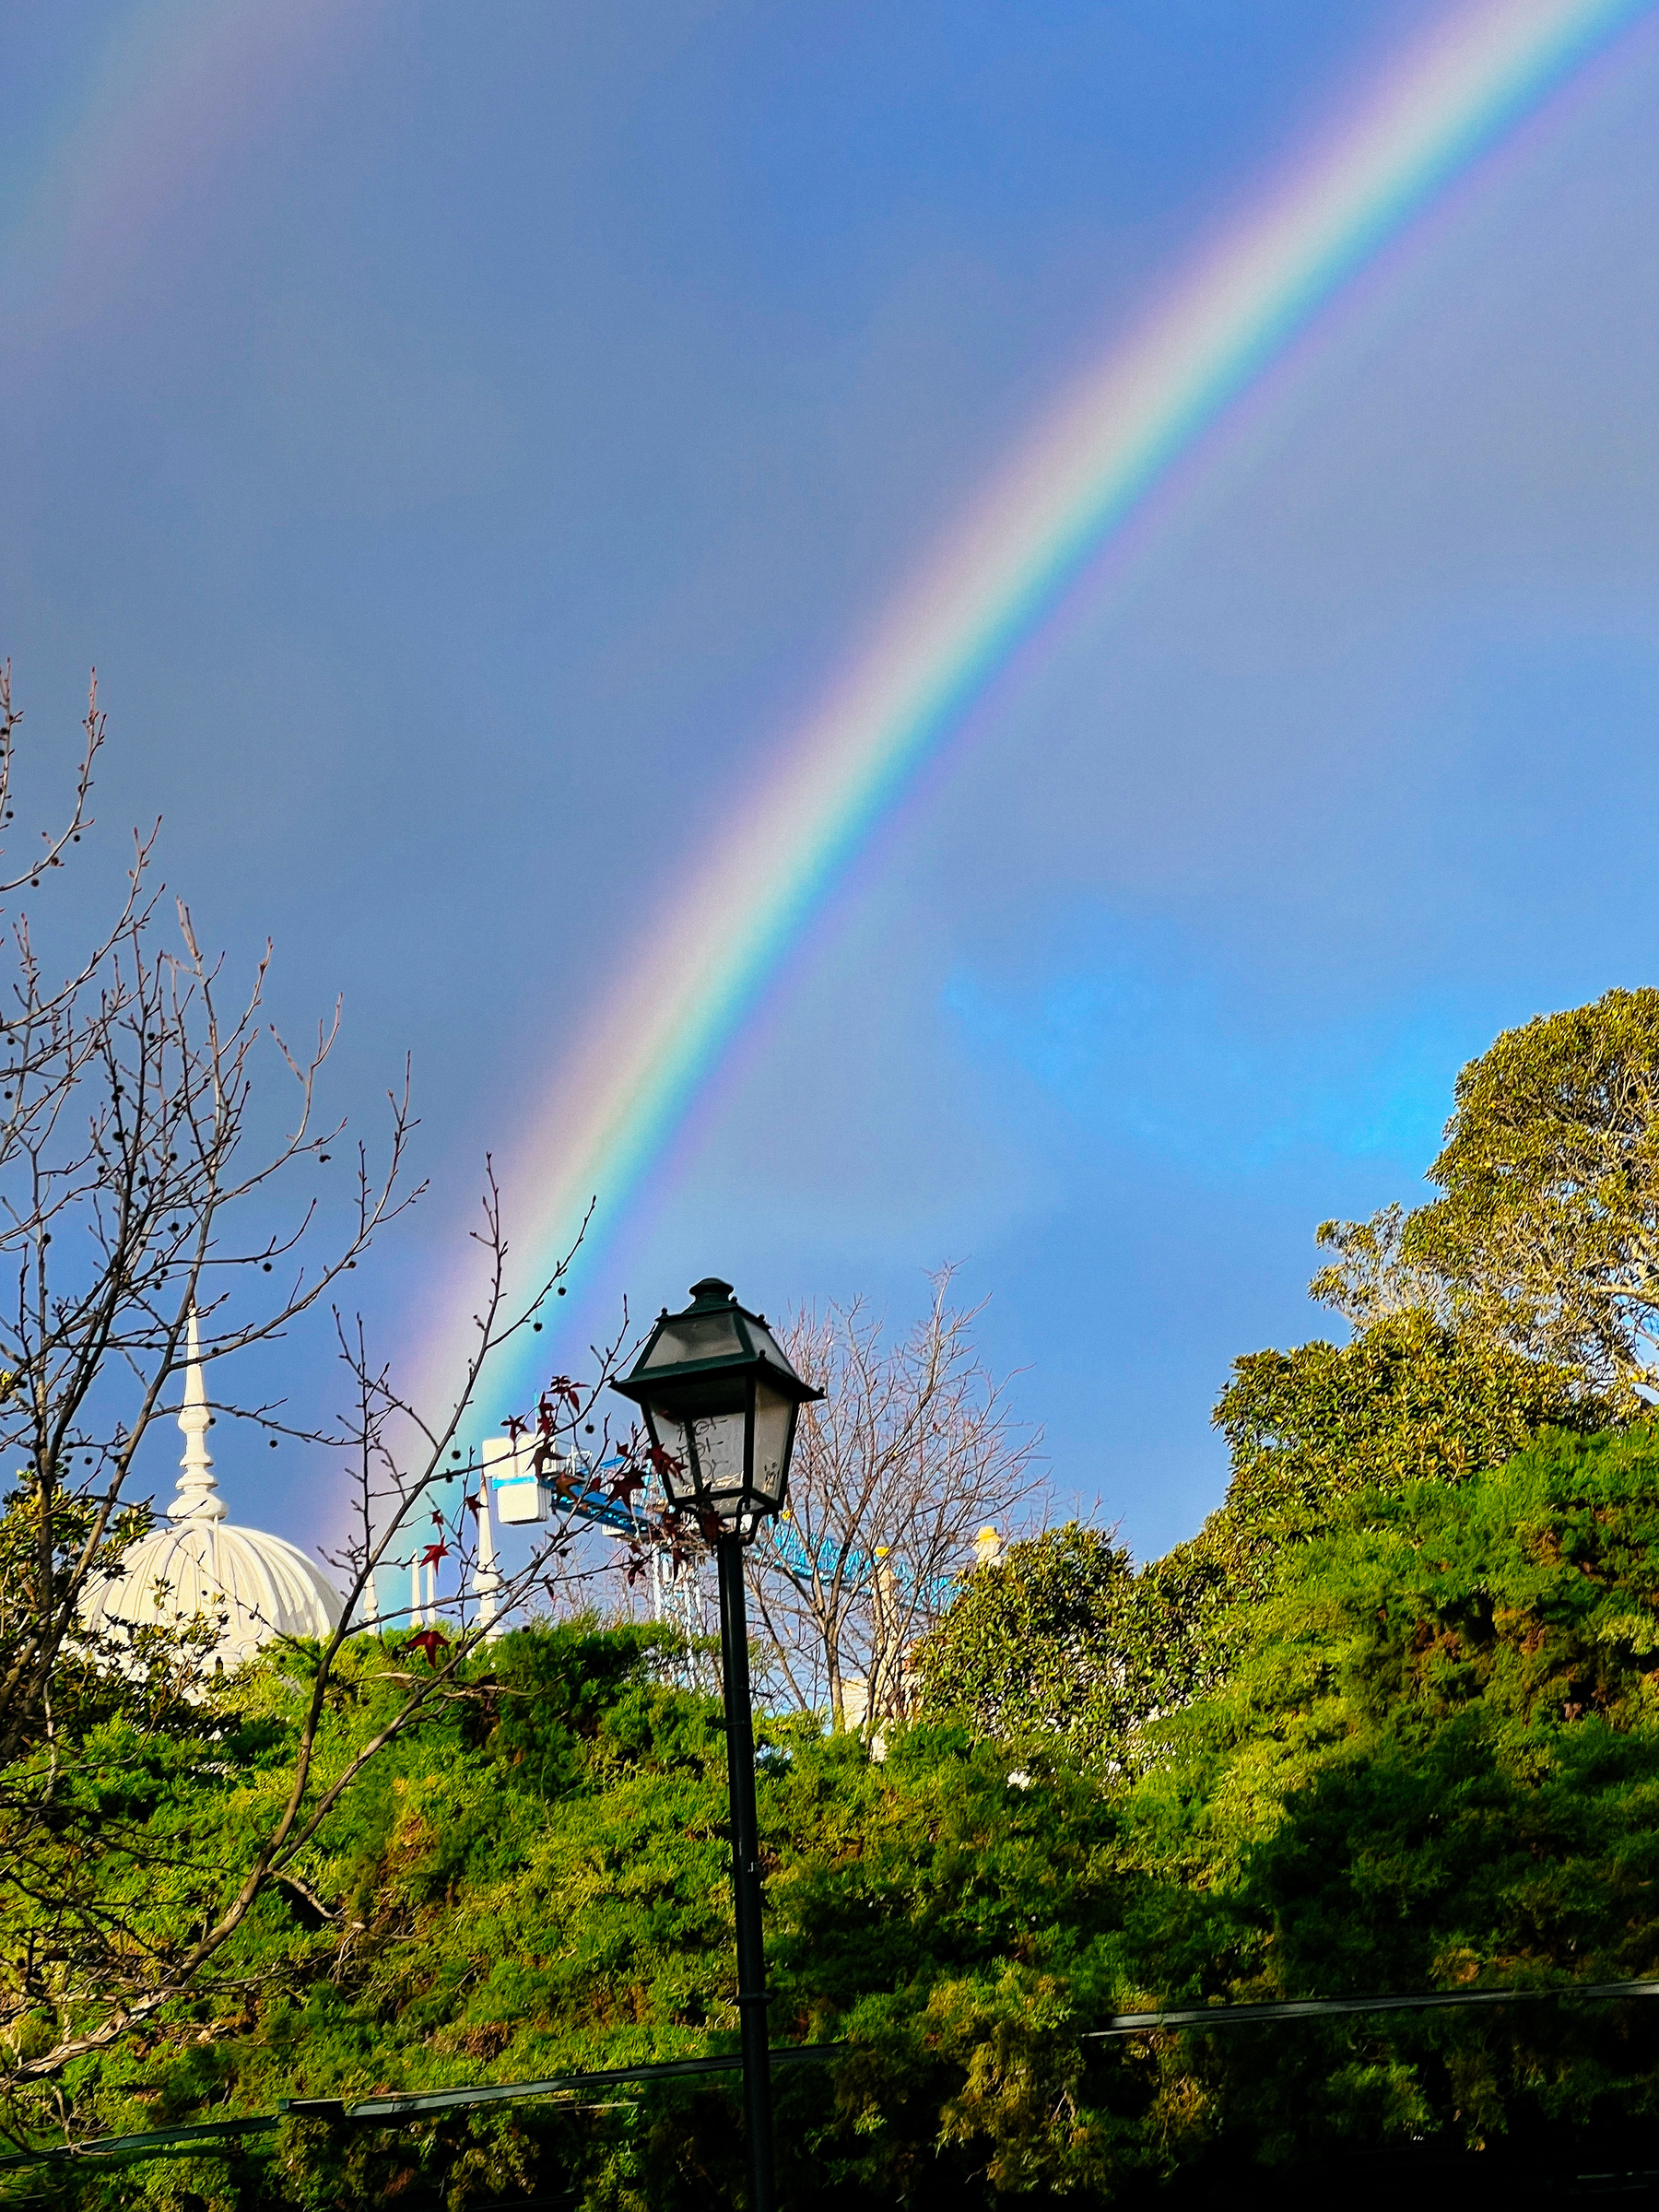 A rainbow in a blue sky with clouds, above green trees and a classic street lamp in the foreground. The dome of a building is partially visible behind the foliage.